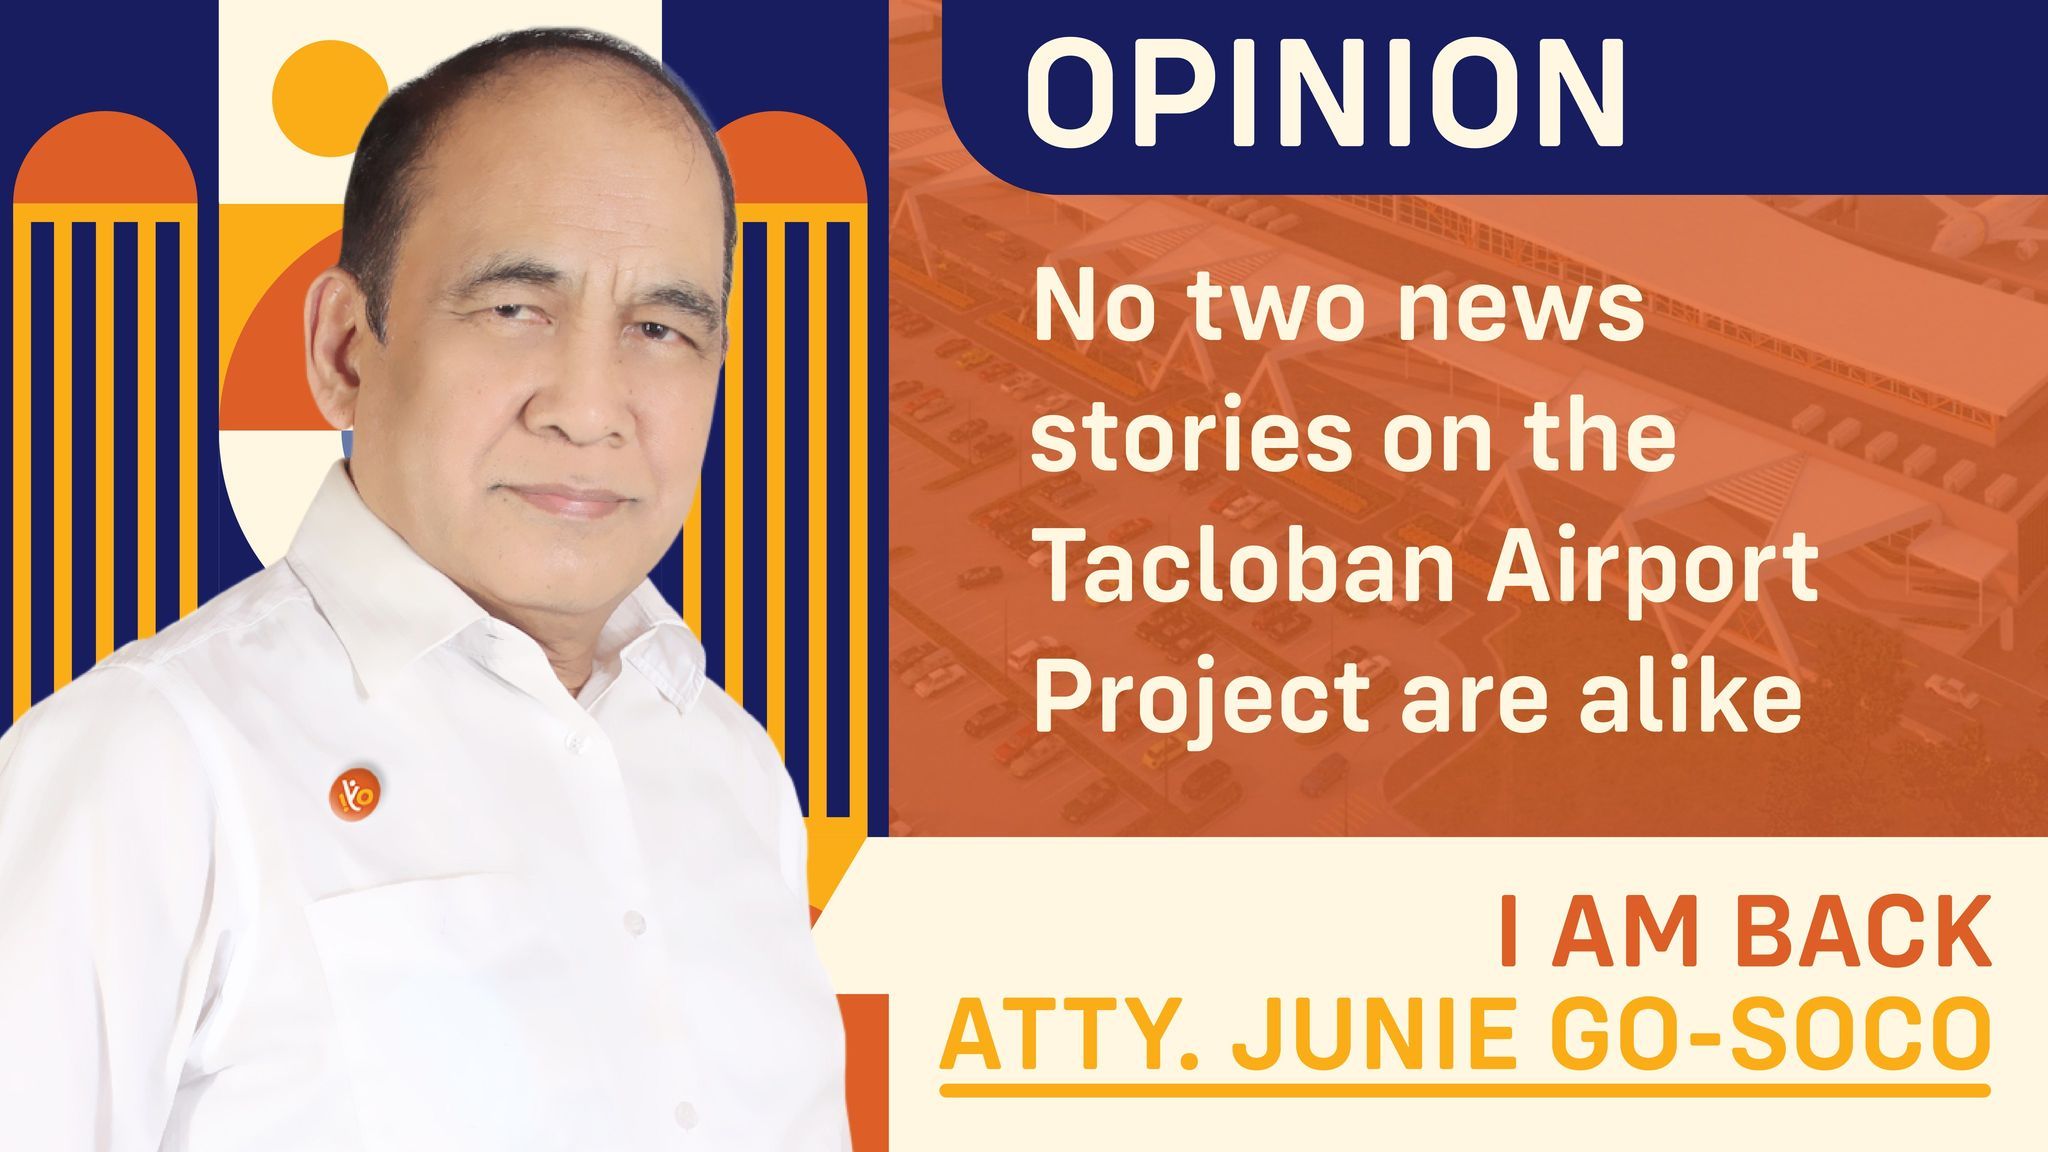 No two news stories on the Tacloban Airport Project are alike